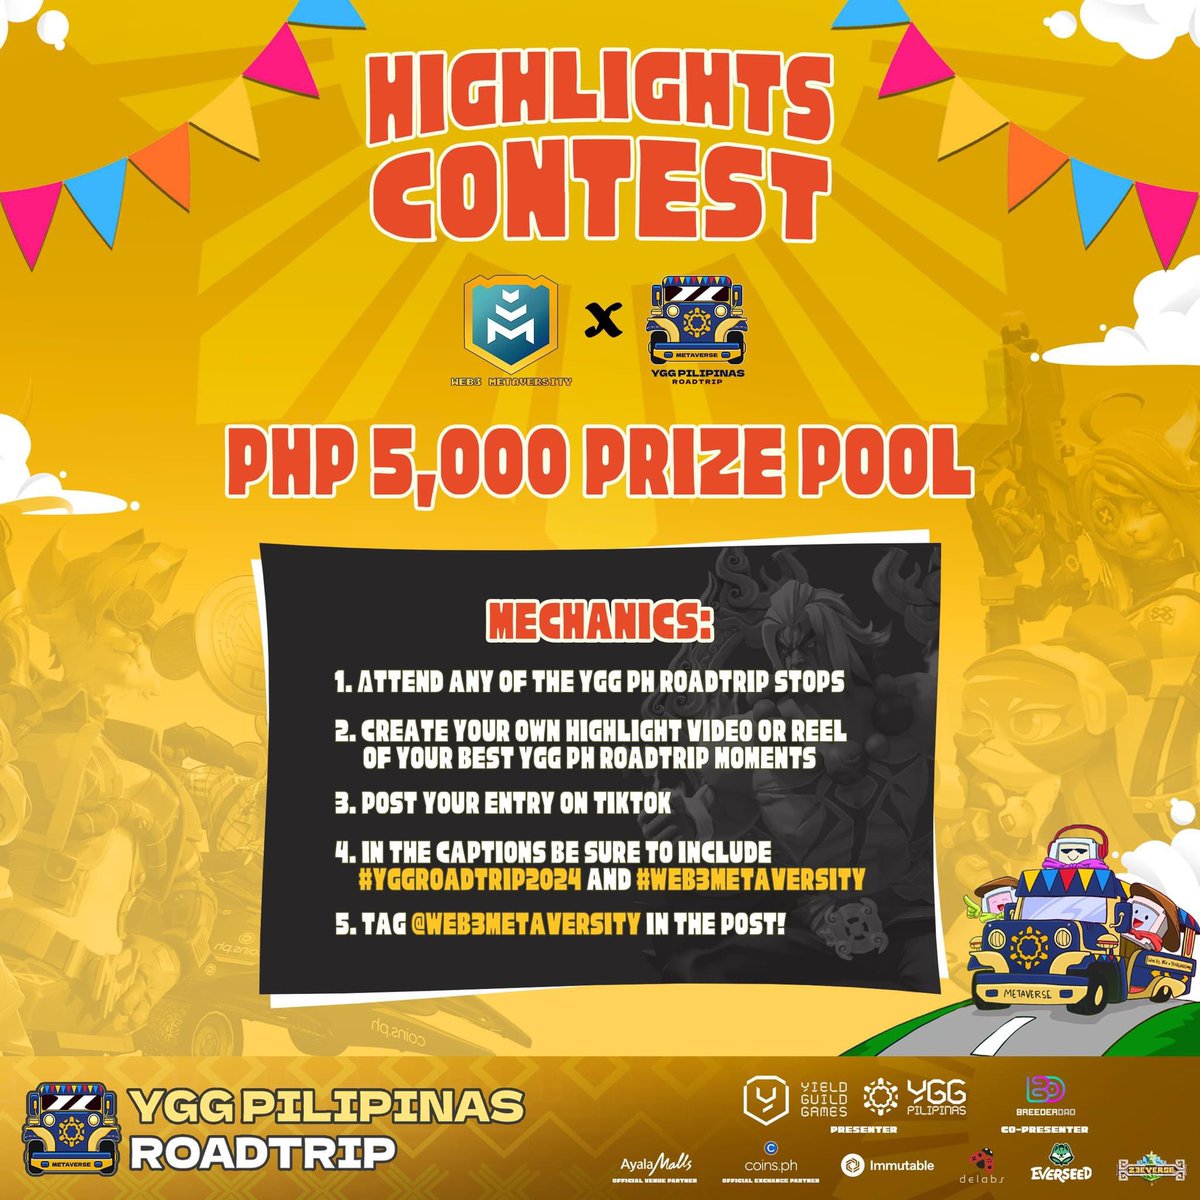 Start your Content Creator era and join our @W3Metaversity x #YGGRoadtri2024 Highlights Contest with a PHP 5,000 Prize Pool! 🔥